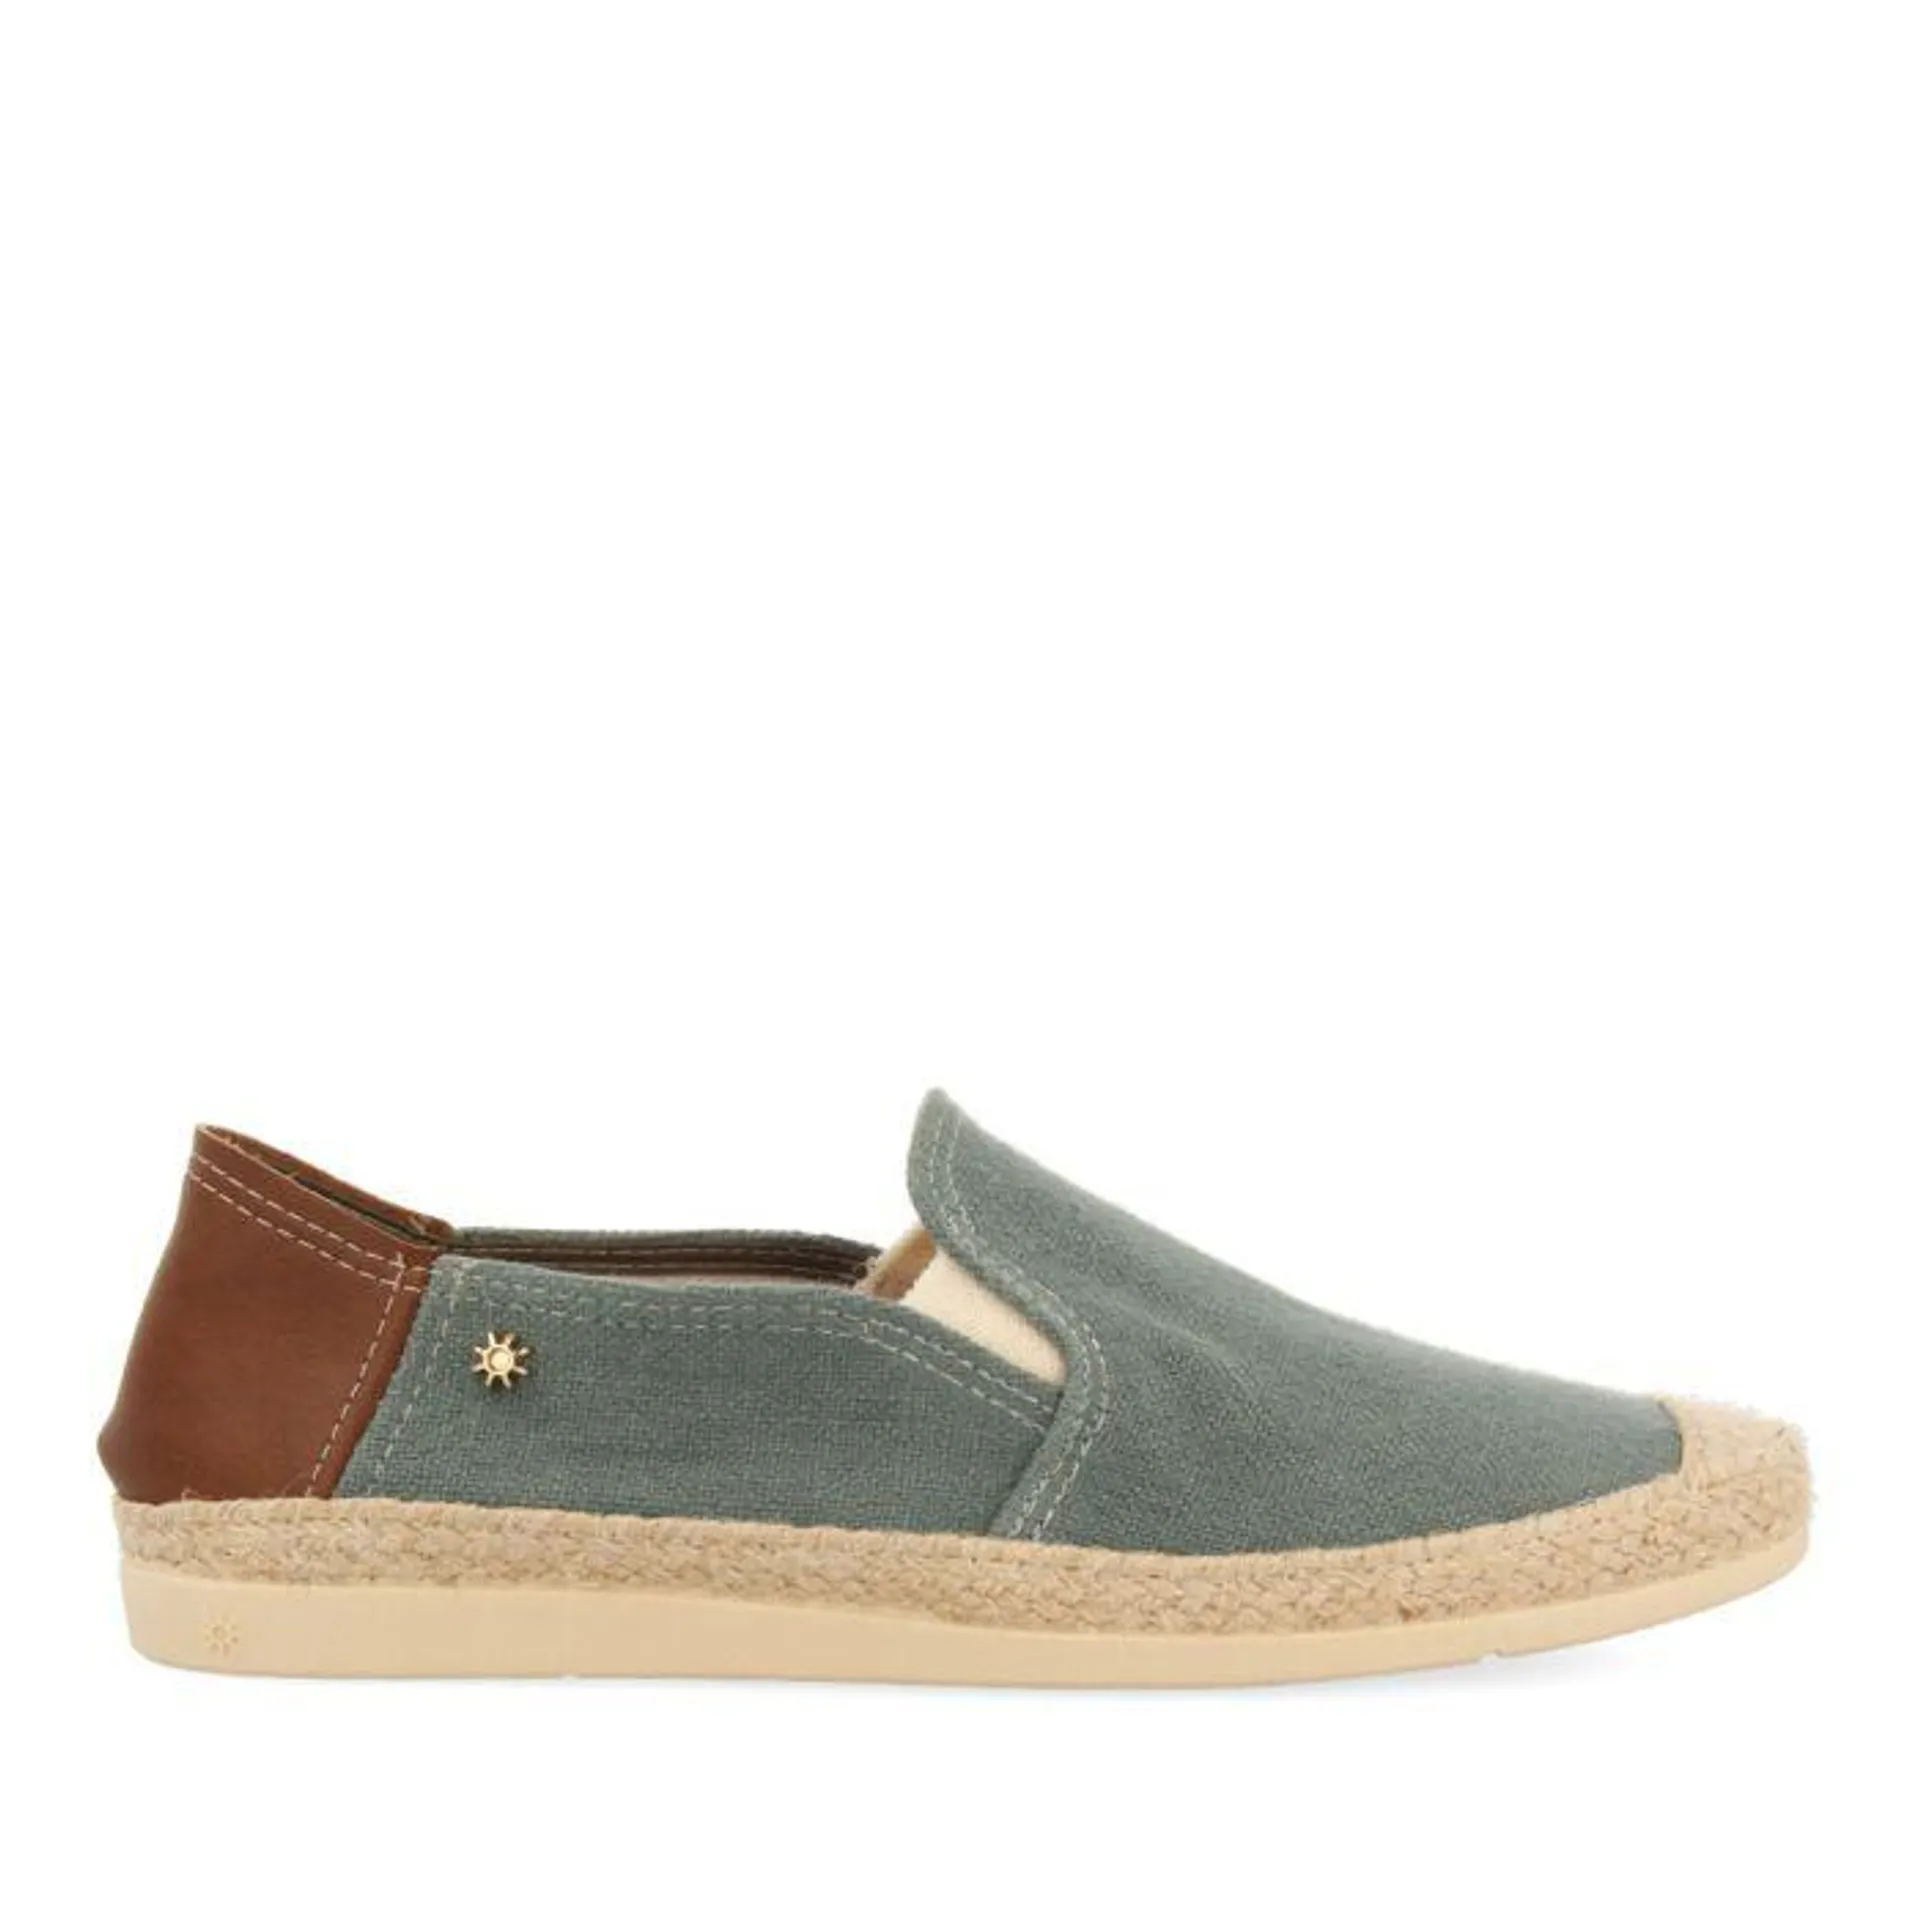 GREEN LA SIESTA ESPADRILLES WITH RECYCLED LINEN FOR MAN ALFARER